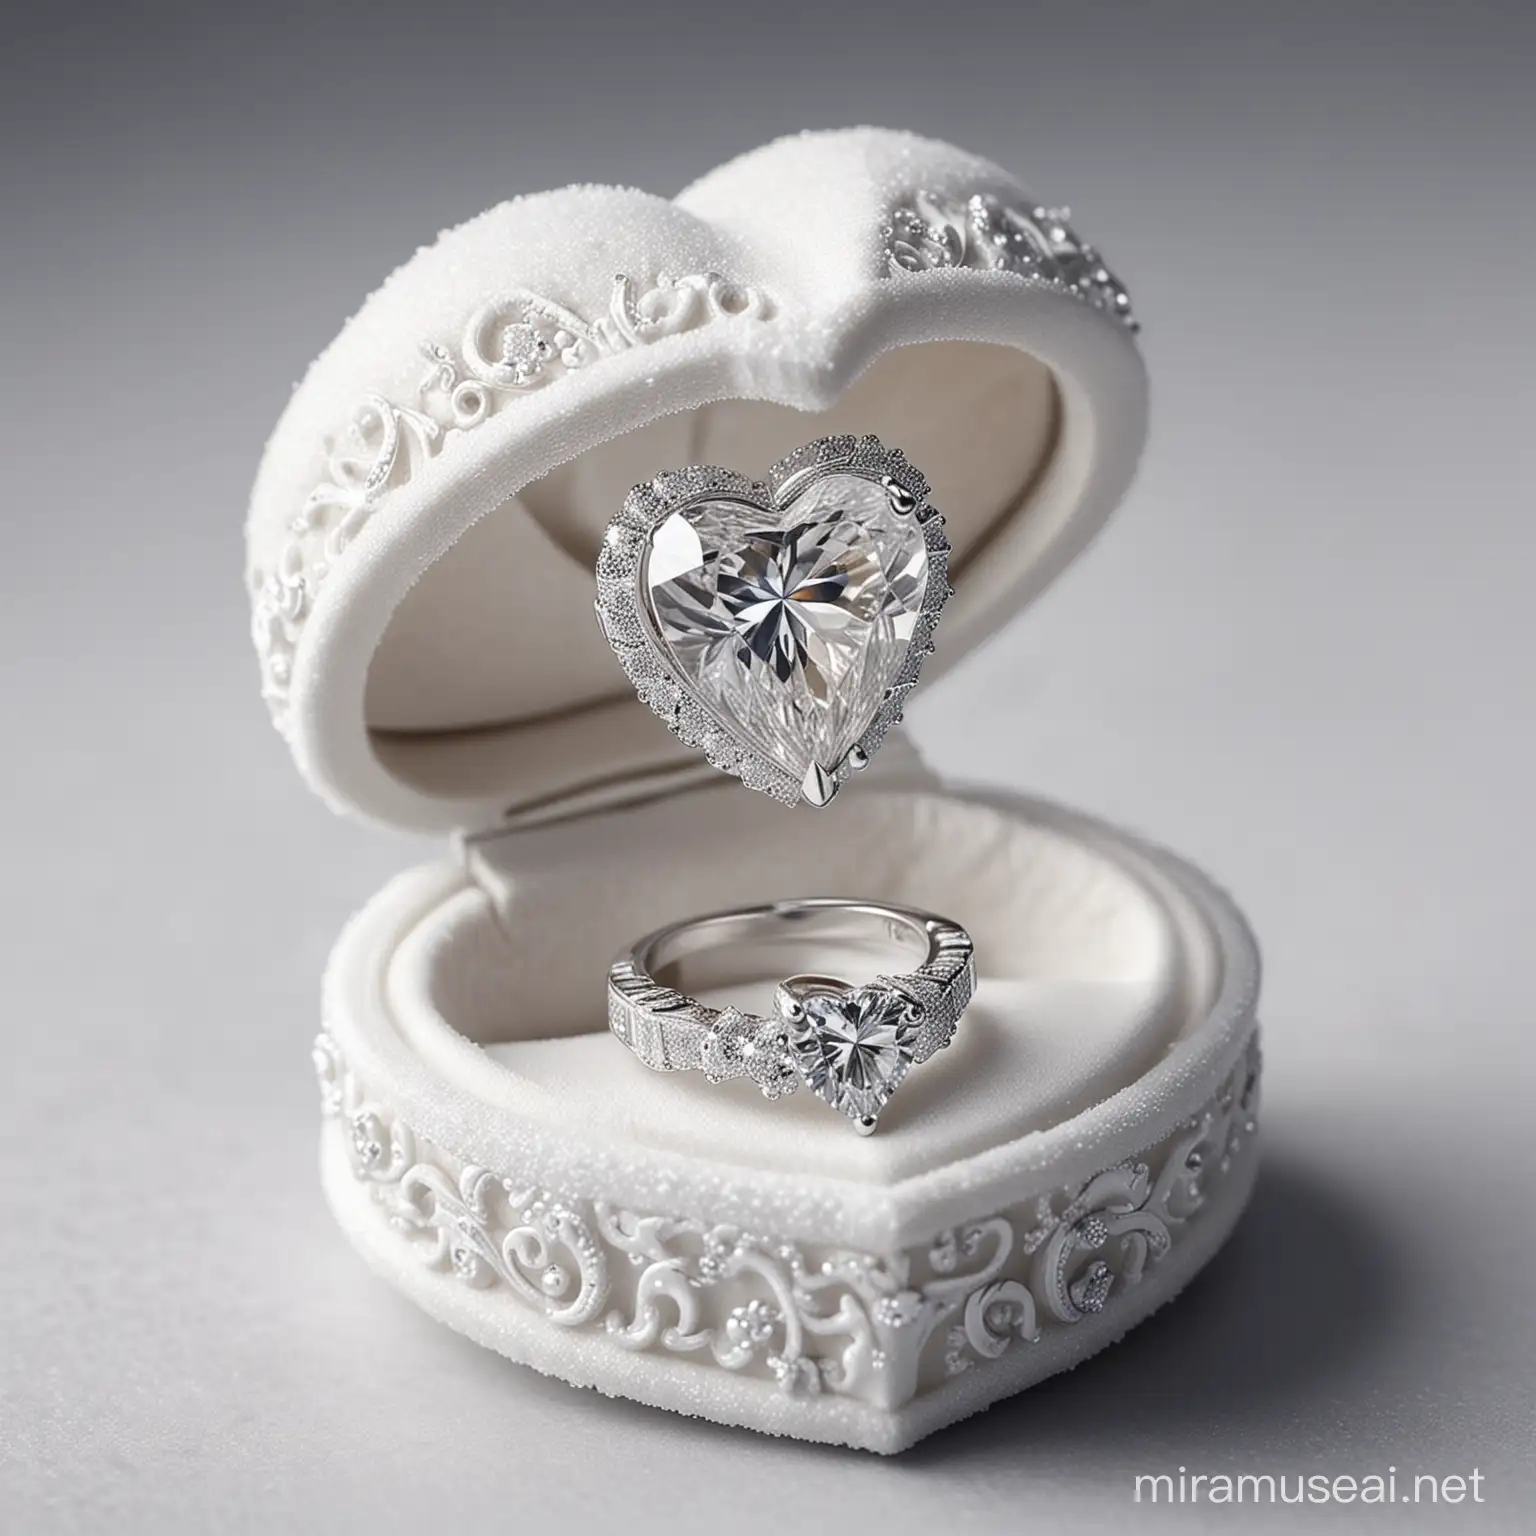 Elegant Icy Heart Ring Box with Stunning Wedding Ring and Large Diamond